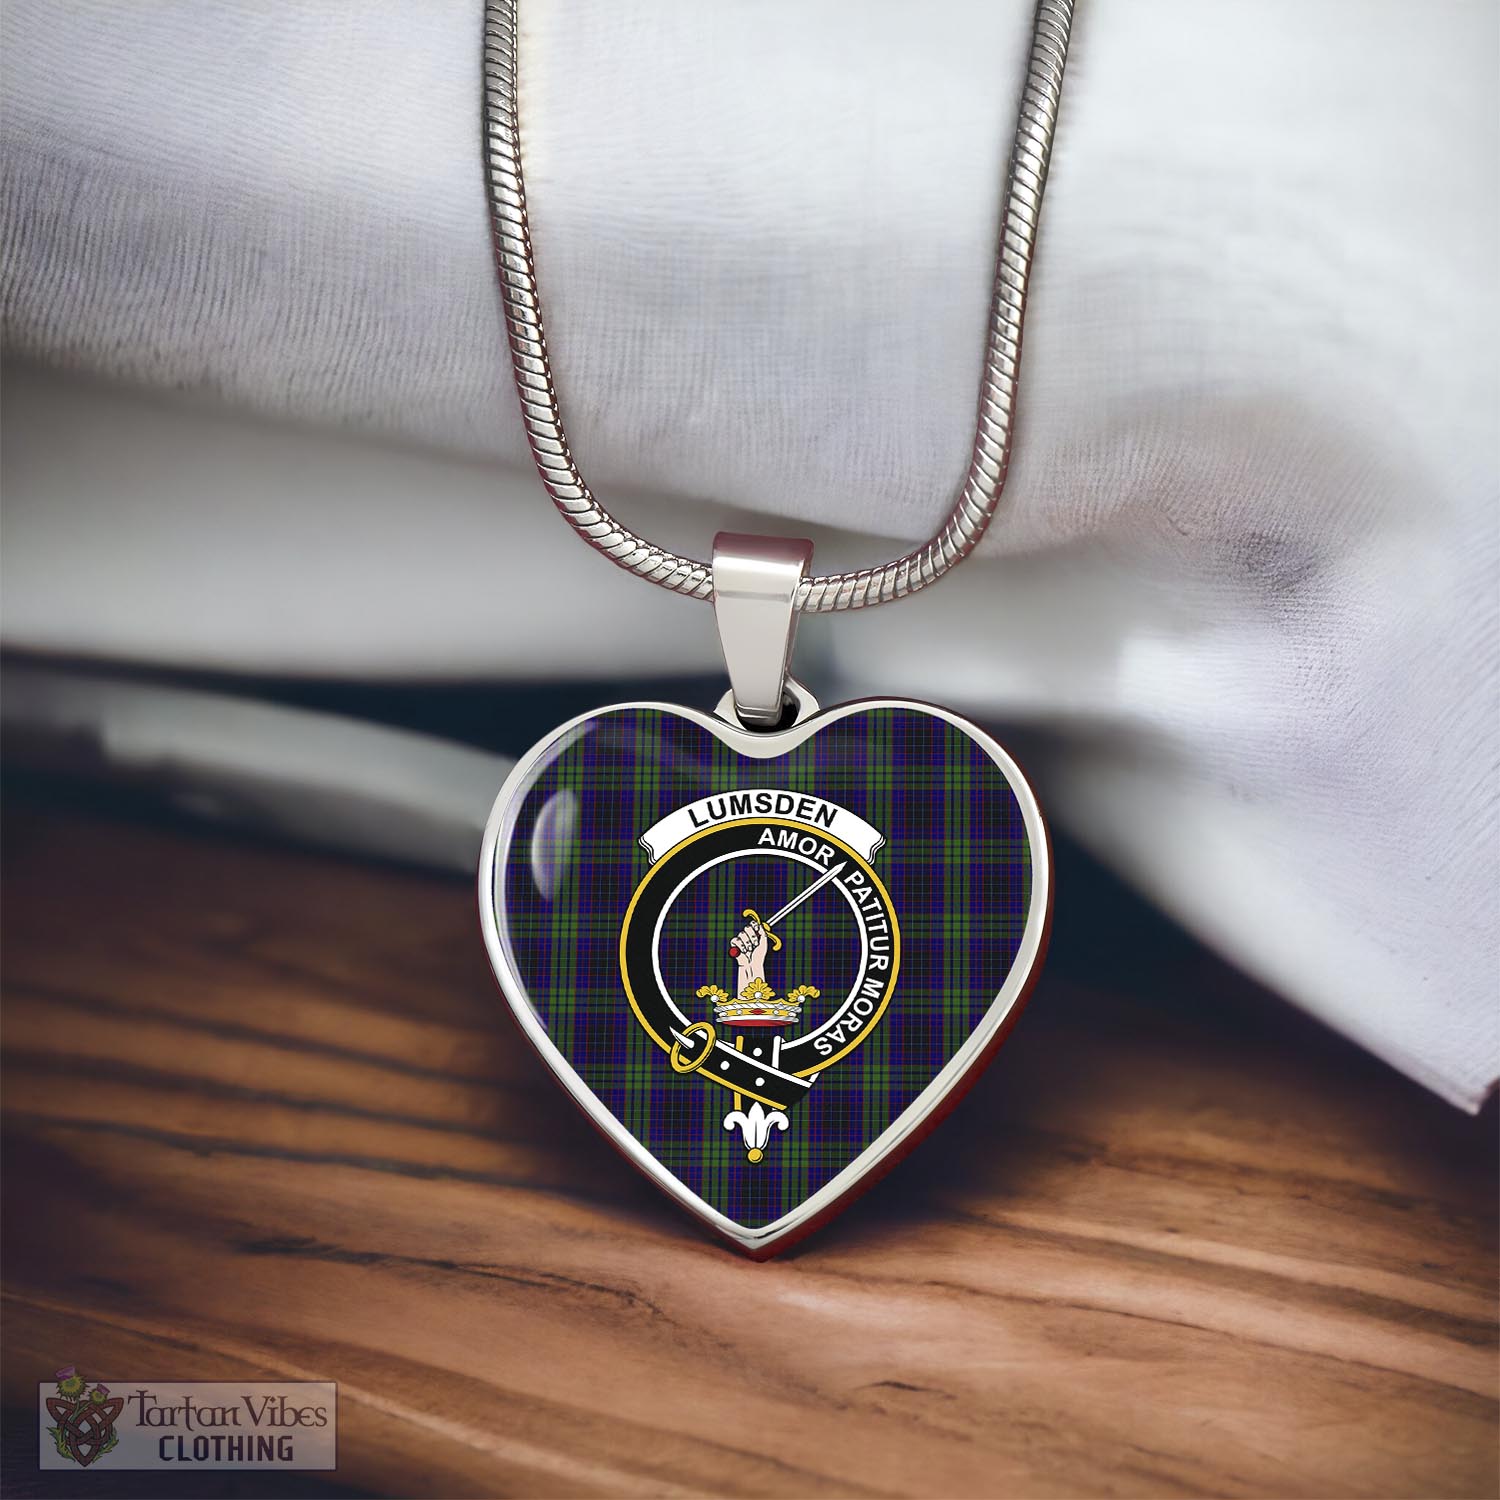 Tartan Vibes Clothing Lumsden Green Tartan Heart Necklace with Family Crest